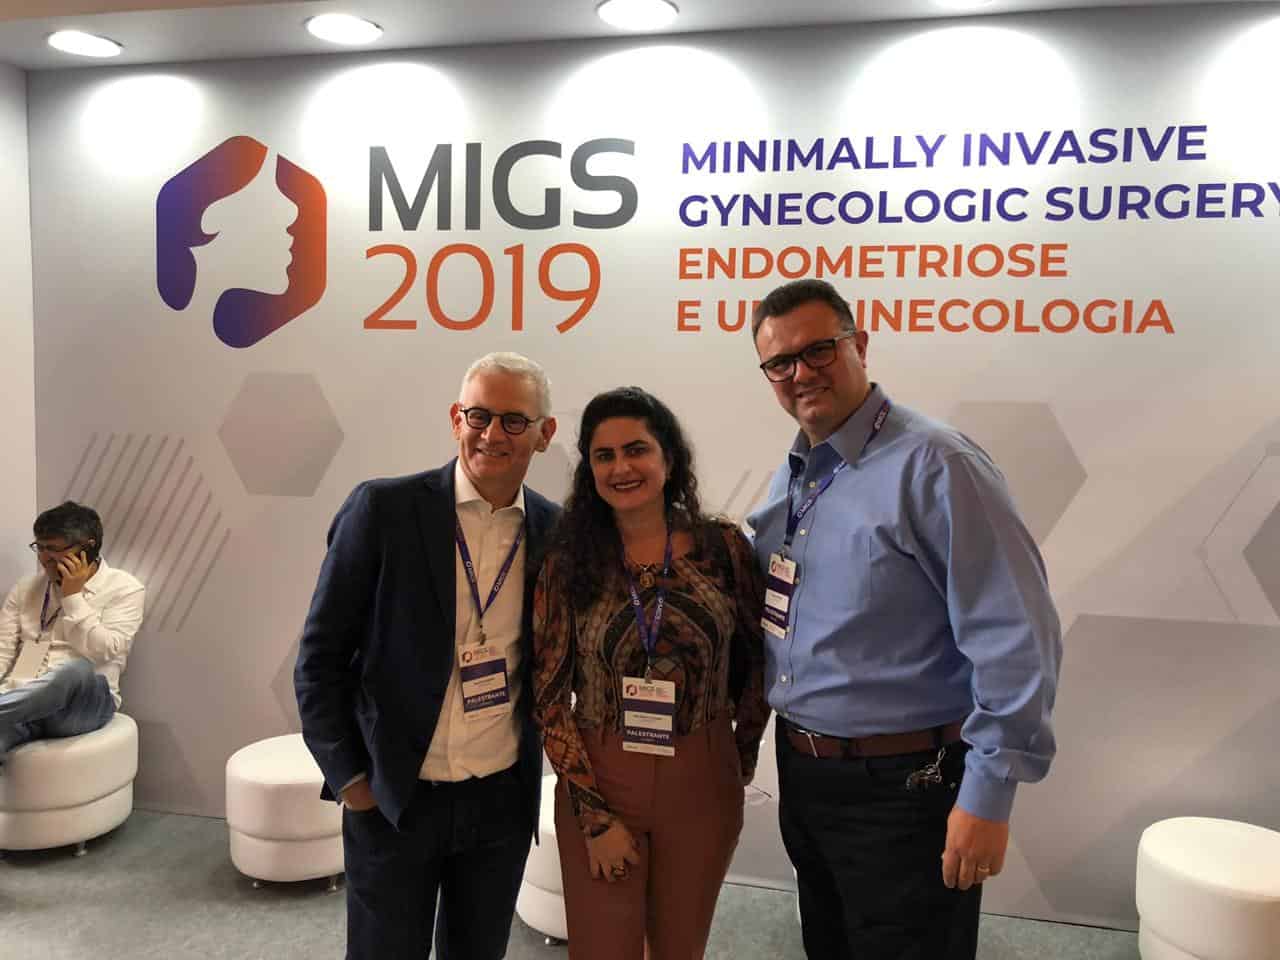 MIGS 2019